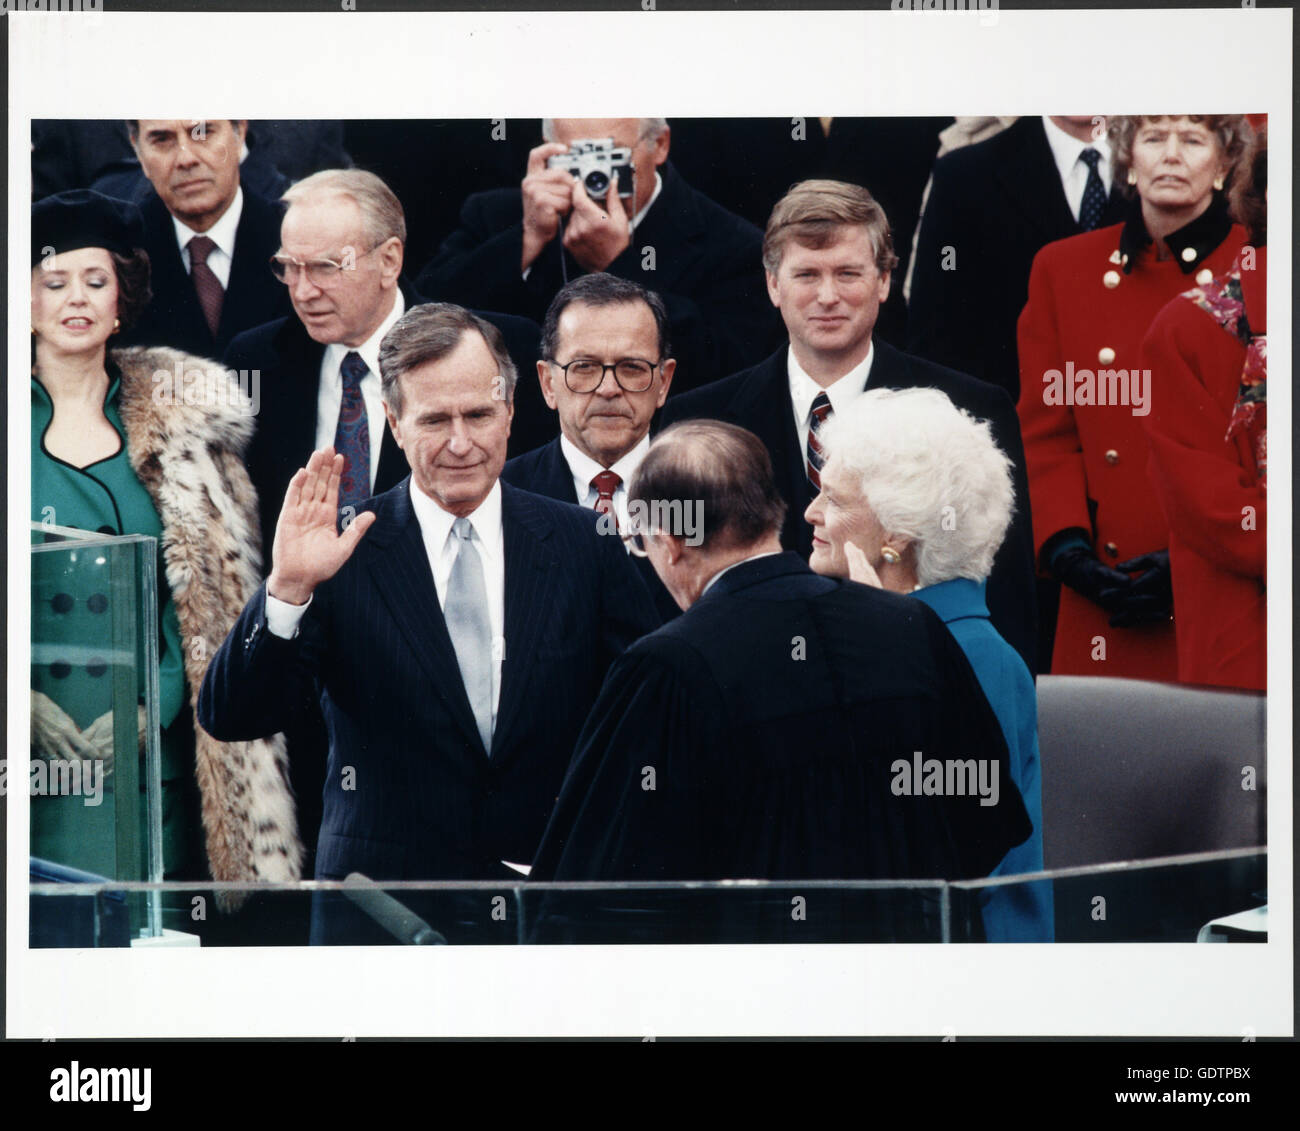 President George H.W. Bush taking the oath of office. Stock Photo